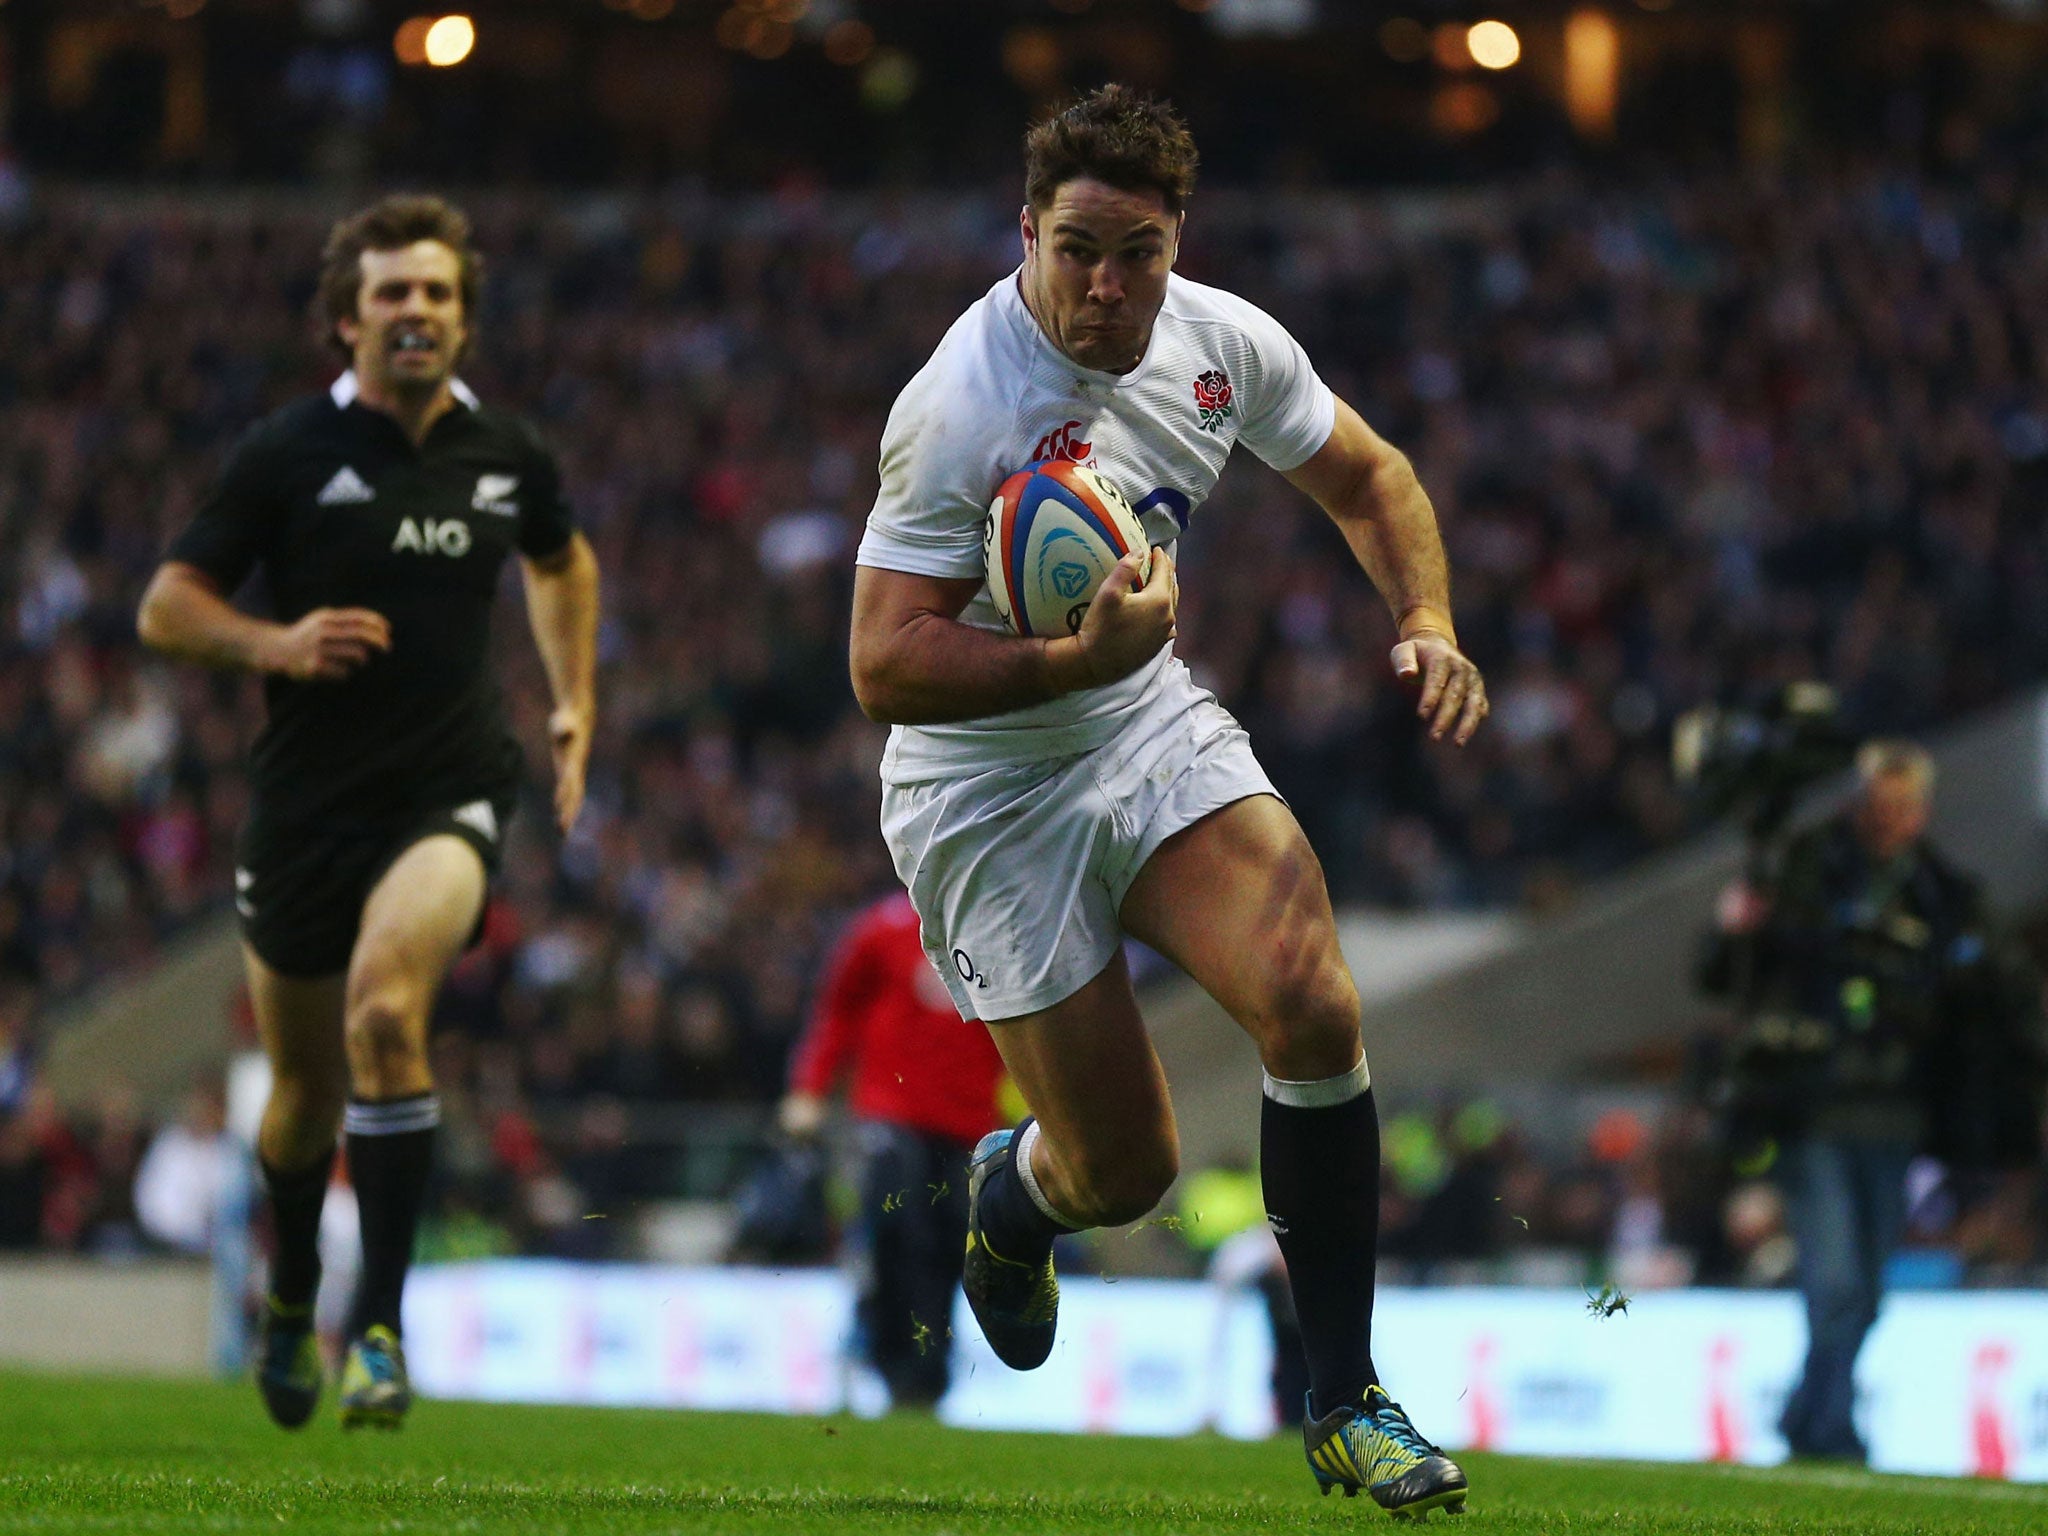 Good times and Brad: Barritt races through a gap to score against the All Blacks, the greatest moment of his career